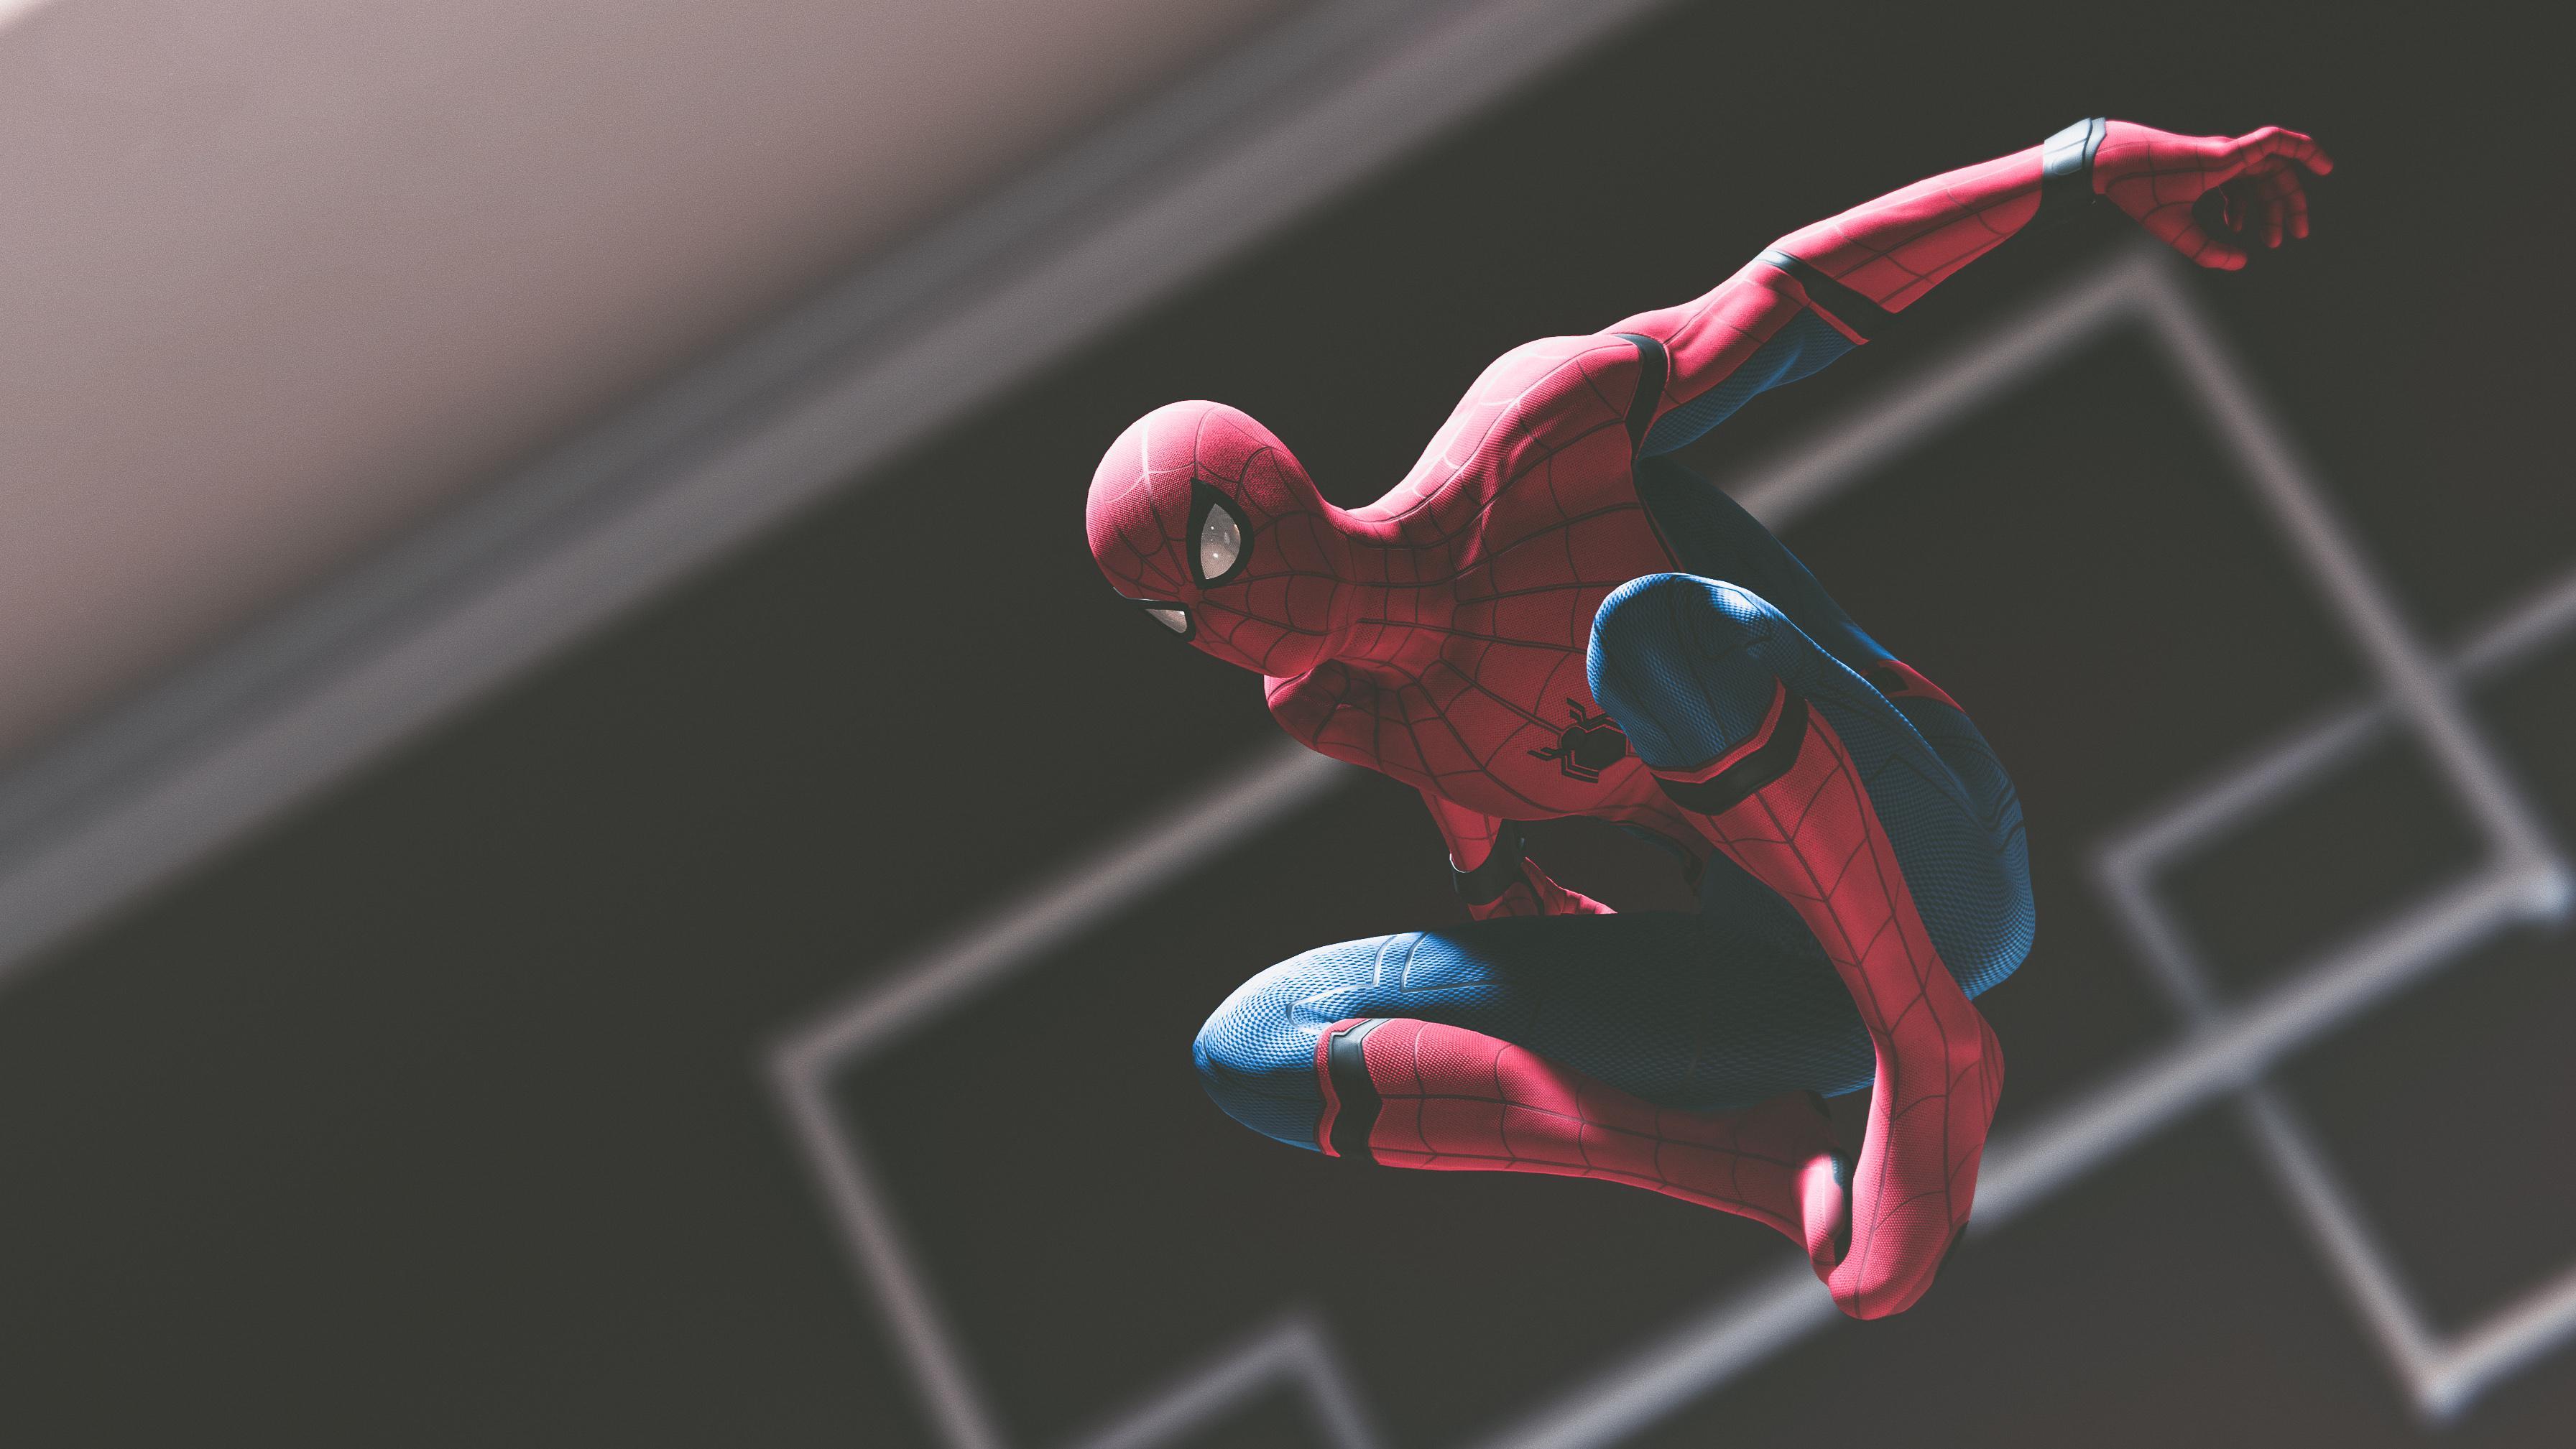 Spiderman 4K wallpaper for your desktop or mobile screen free and easy to download